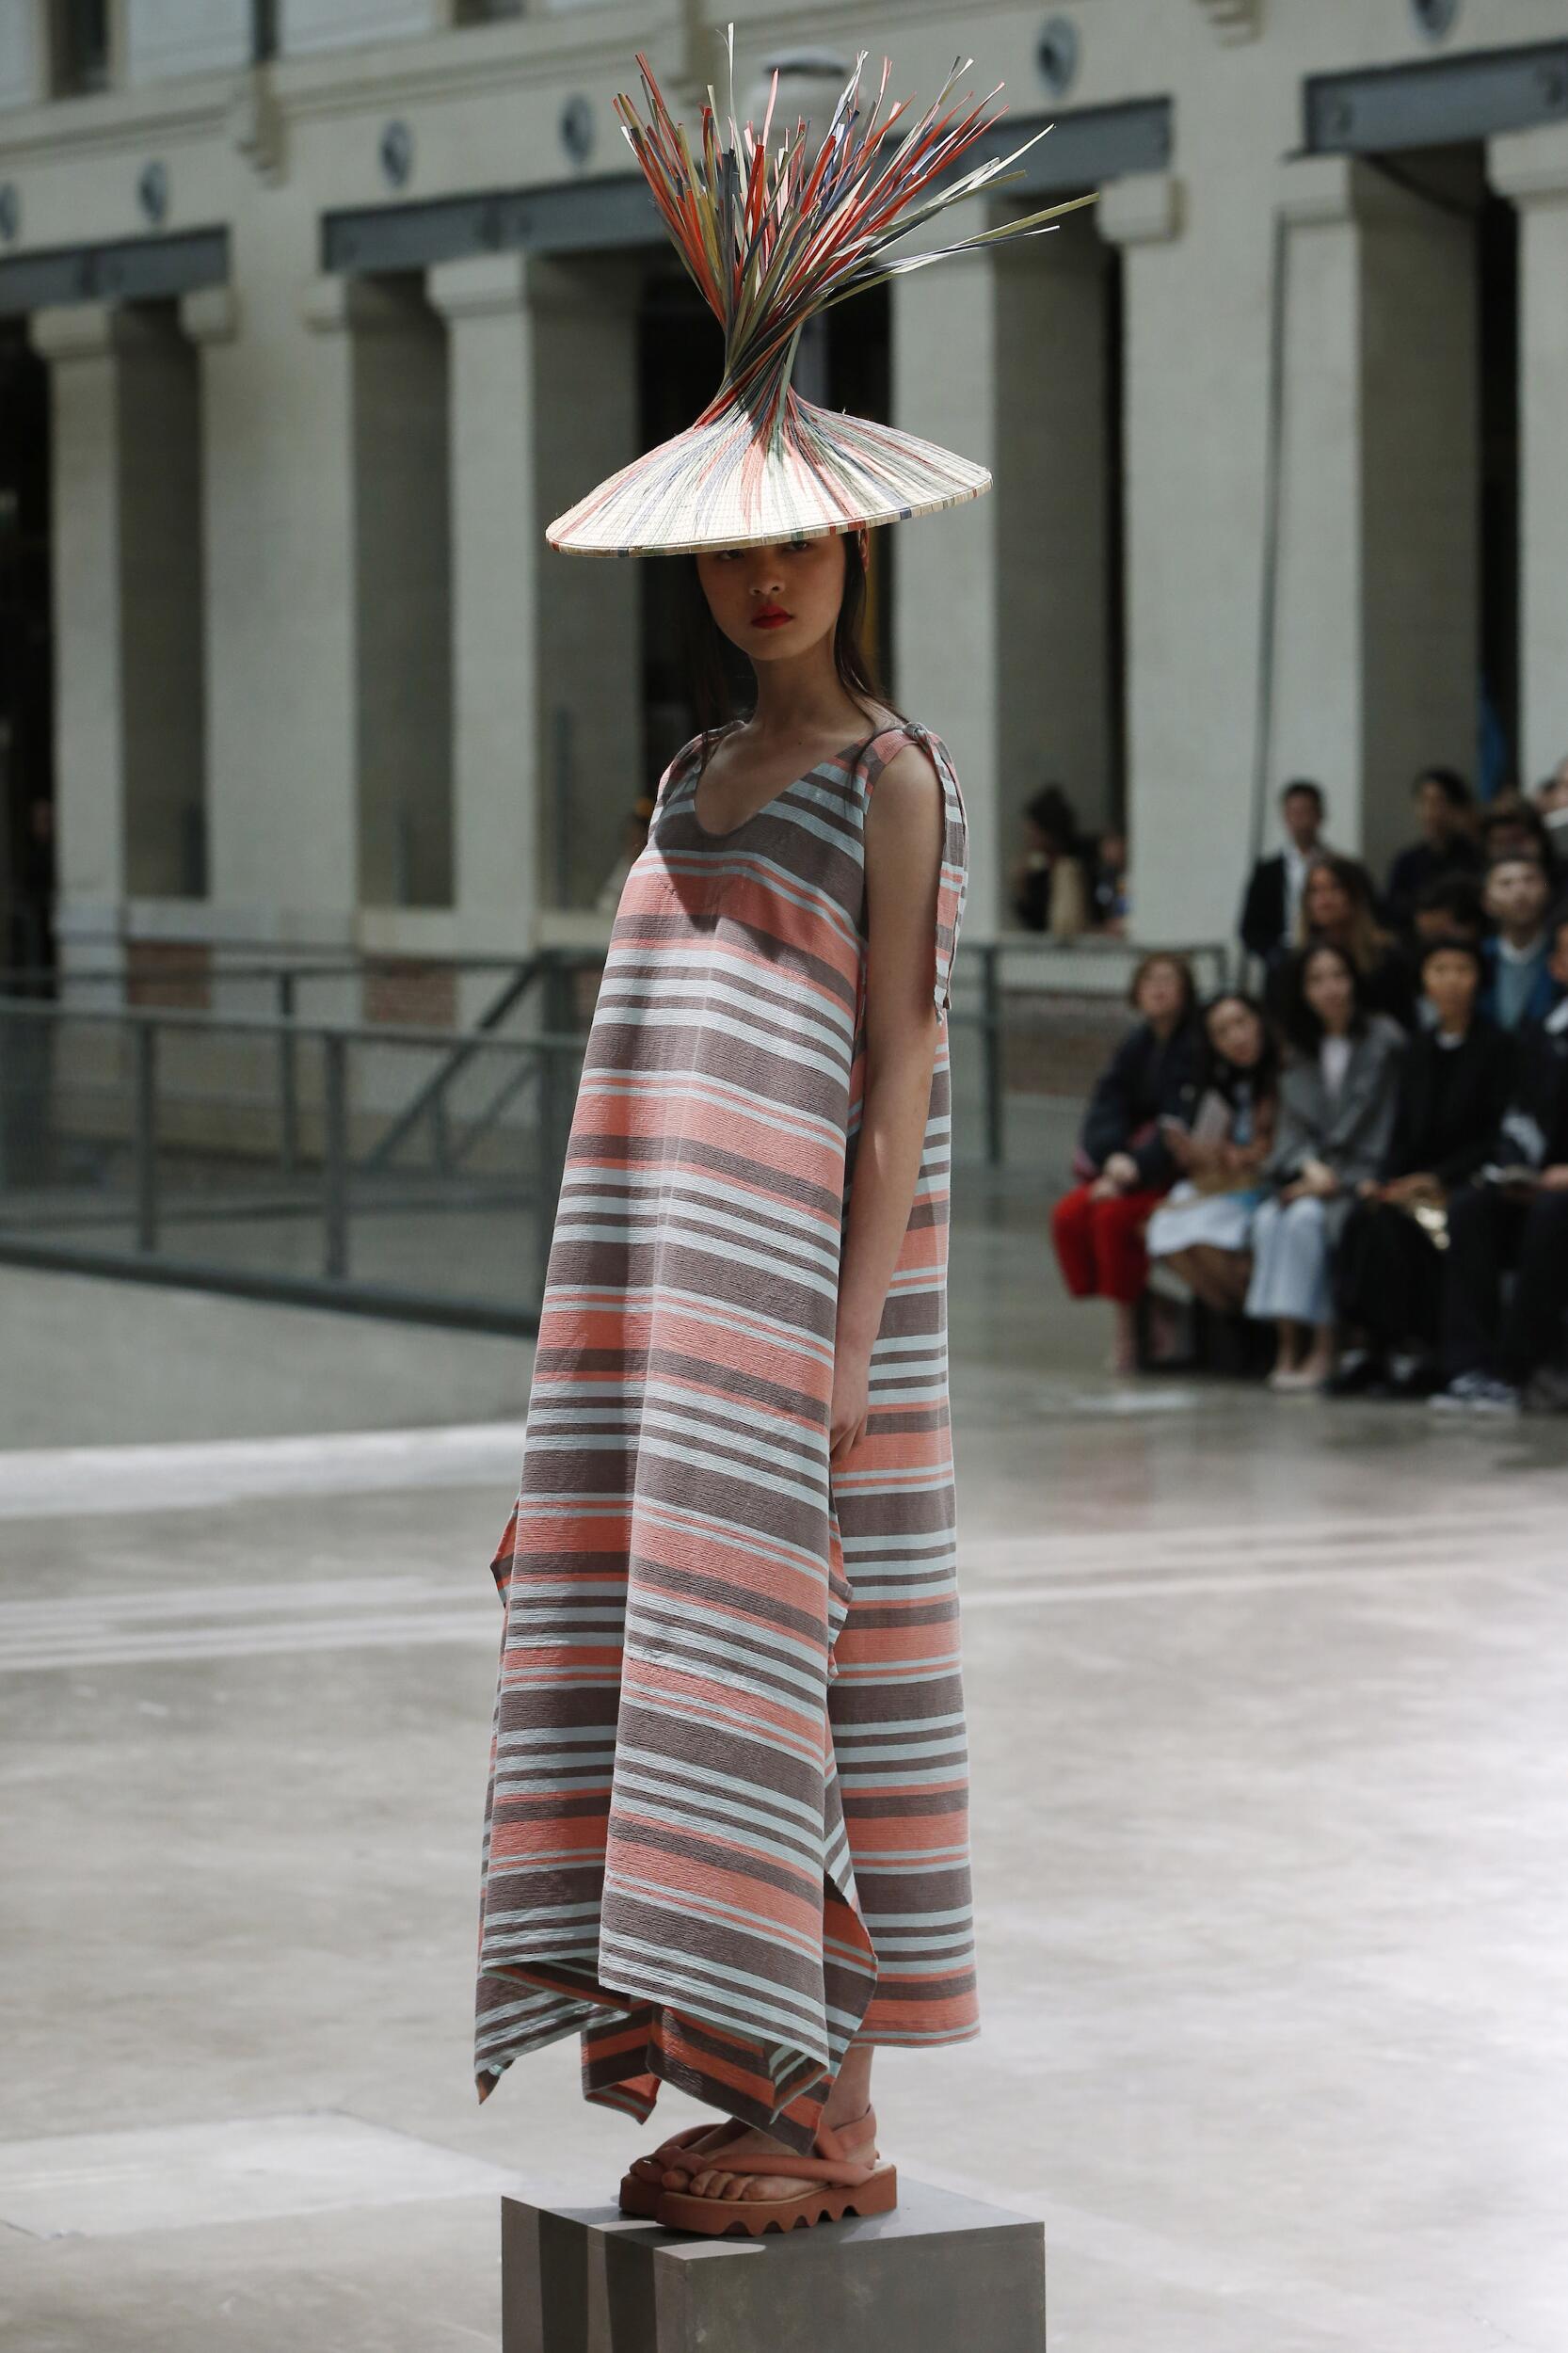 ISSEY MIYAKE SPRING SUMMER 2020 WOMEN’S COLLECTION | The Skinny Beep